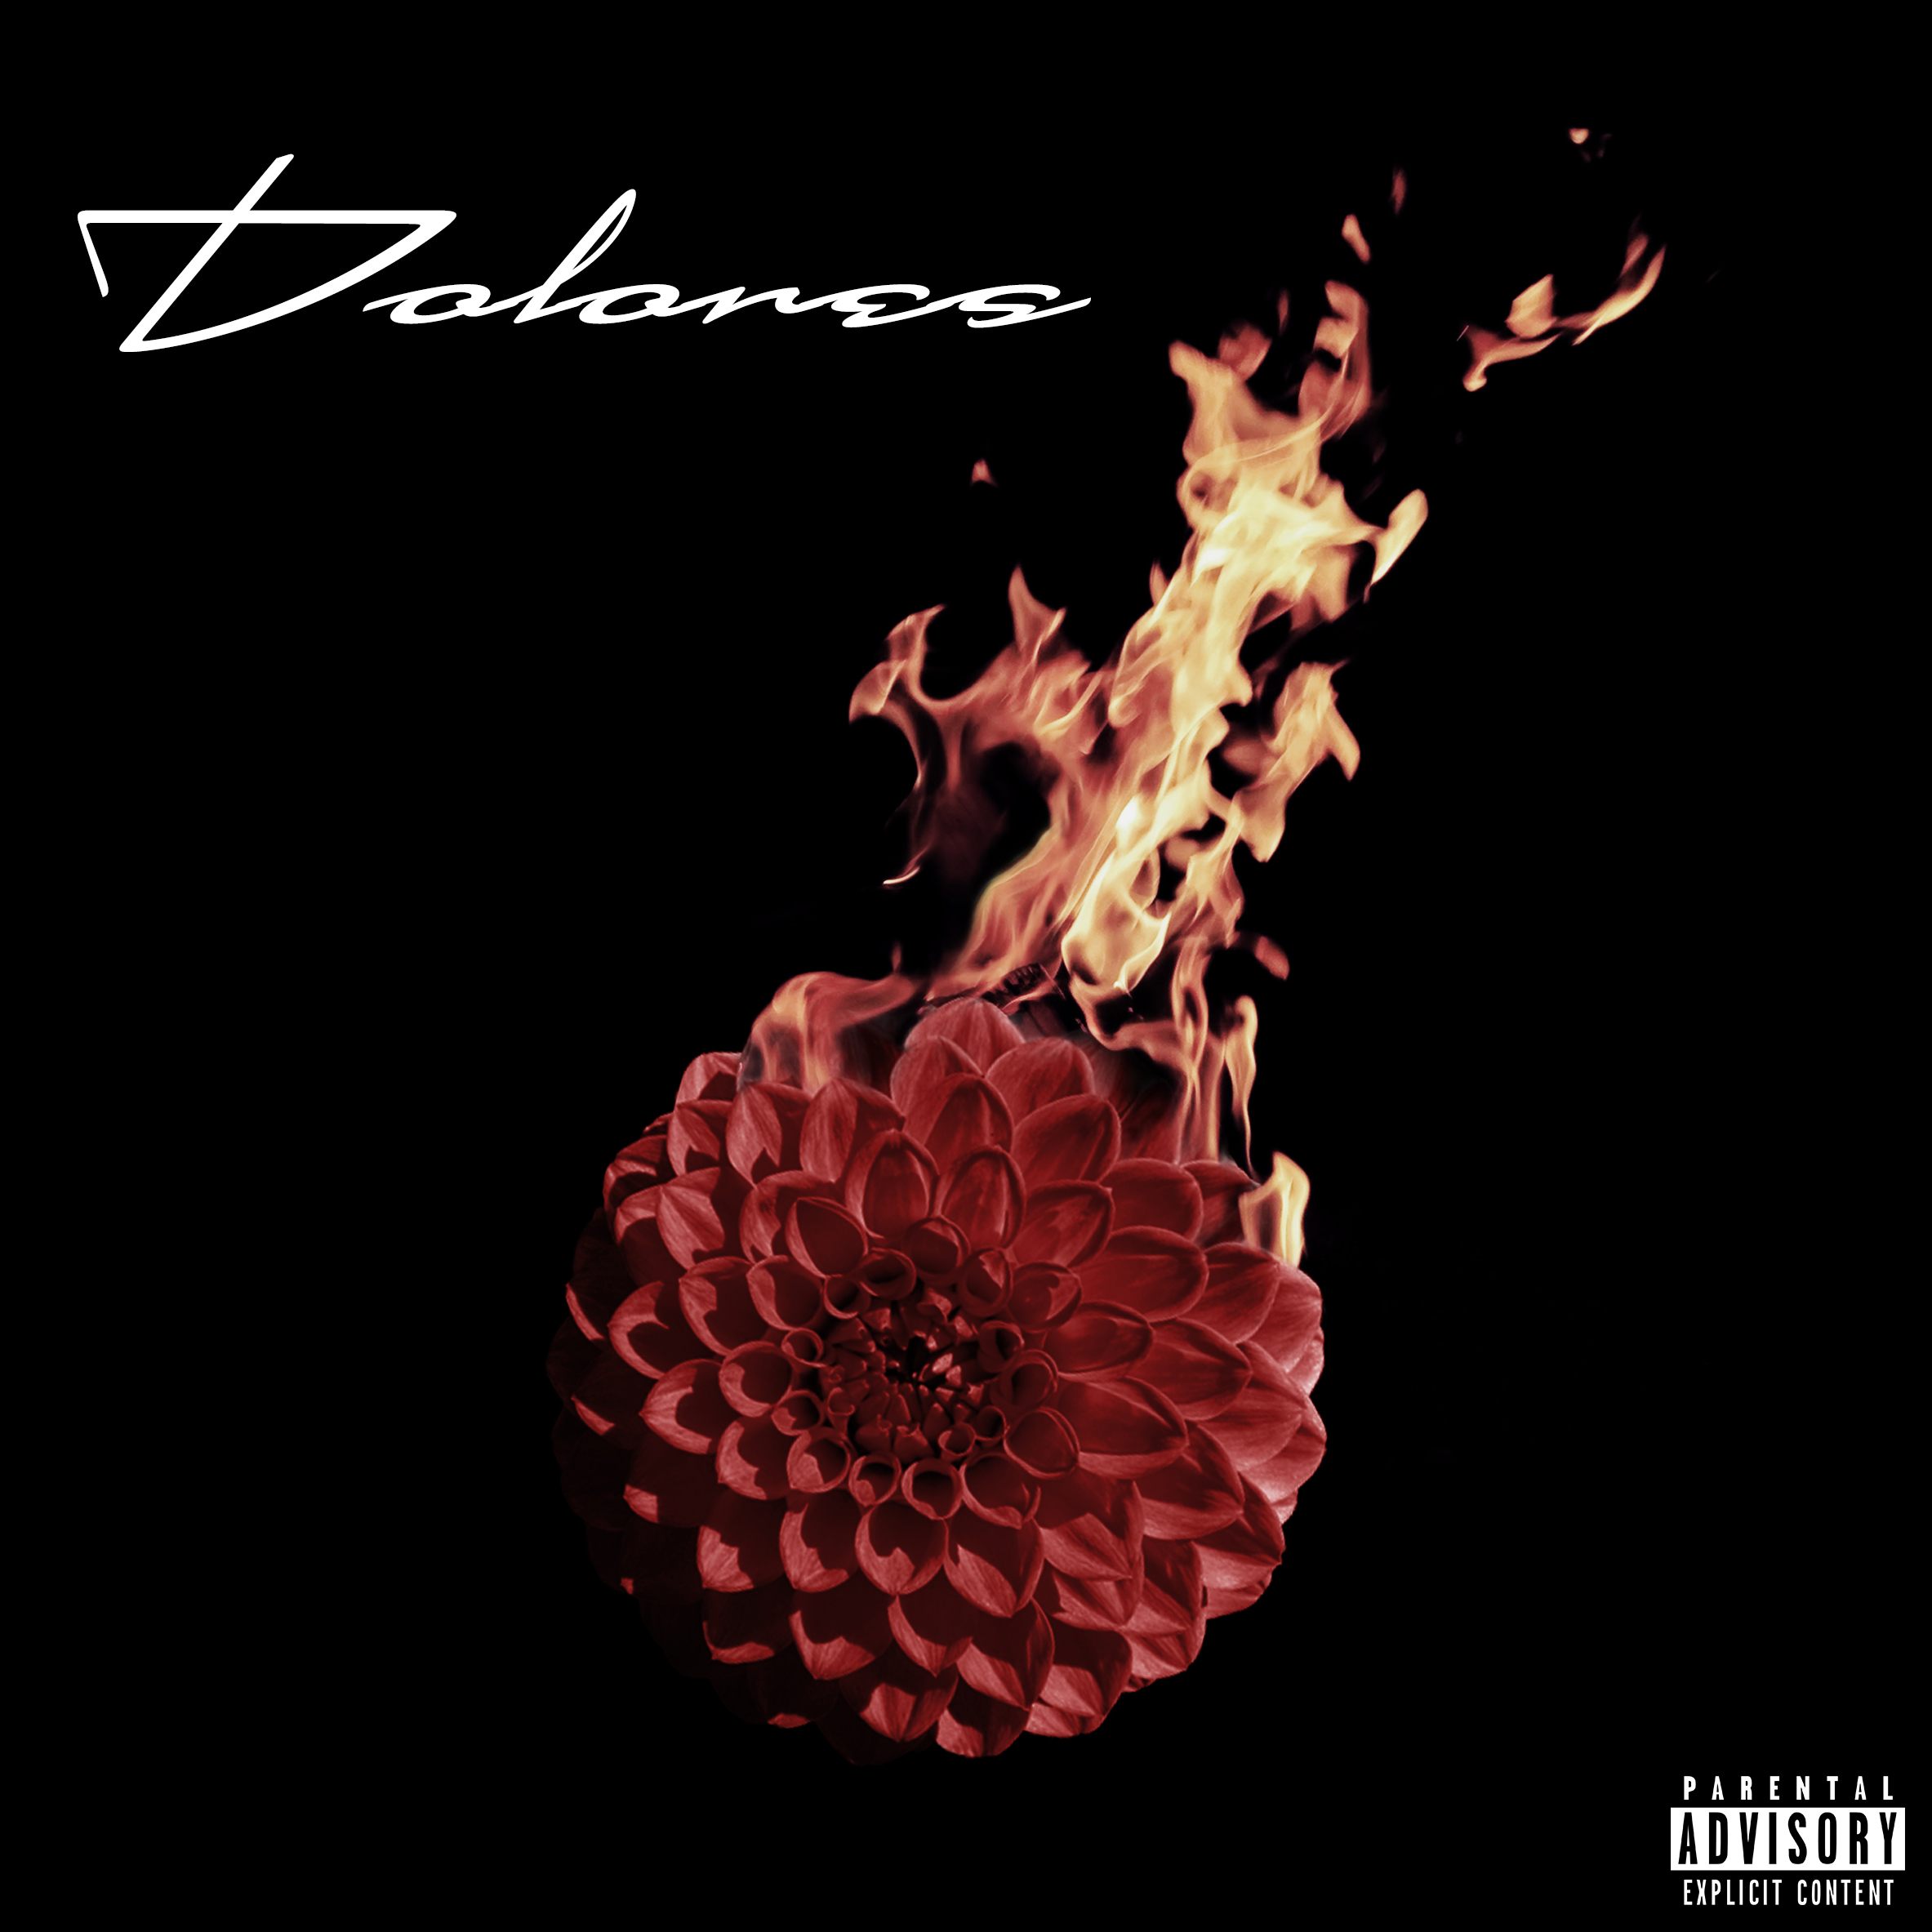 Red flower on fire in the style of an album cover. Text reads: 'Dolores'.